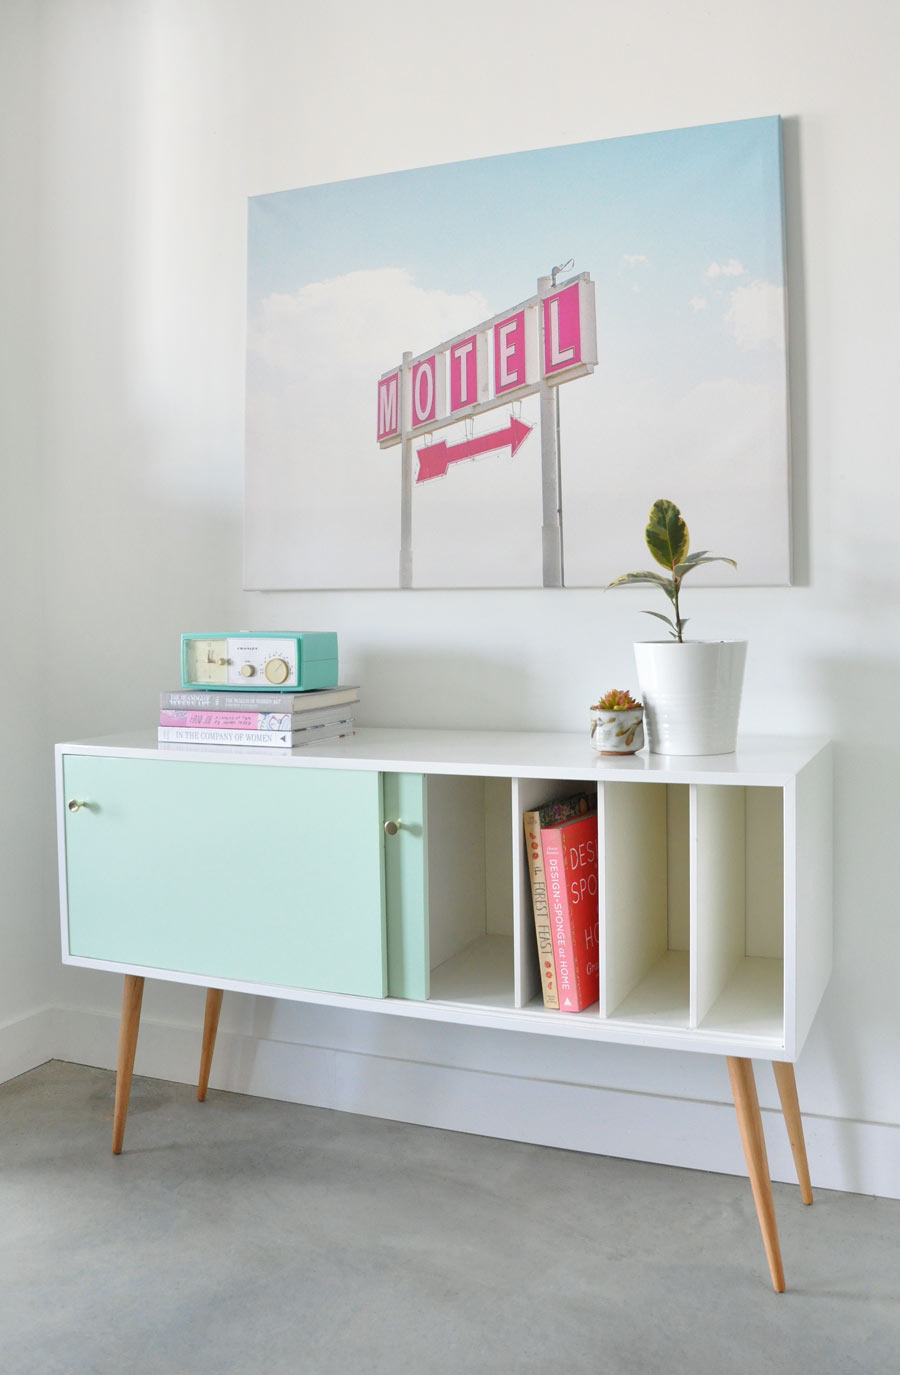 Vintage mid-century modern console before and after